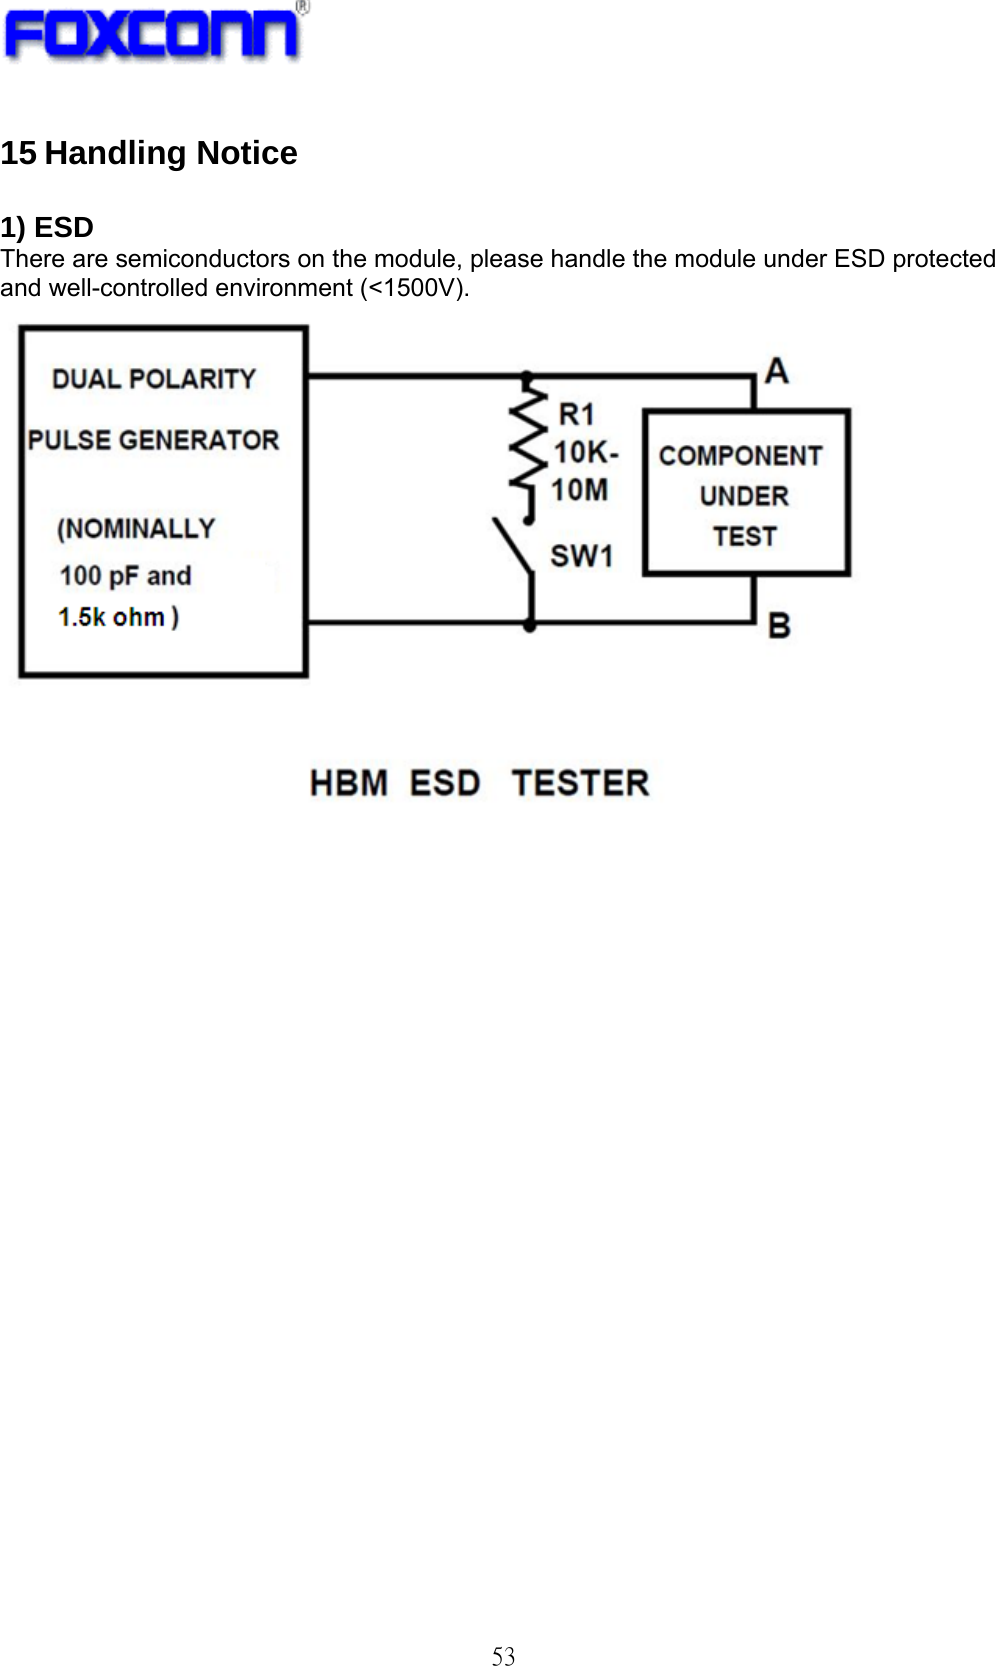   53 15 Handling Notice  1) ESD There are semiconductors on the module, please handle the module under ESD protected and well-controlled environment (&lt;1500V).  